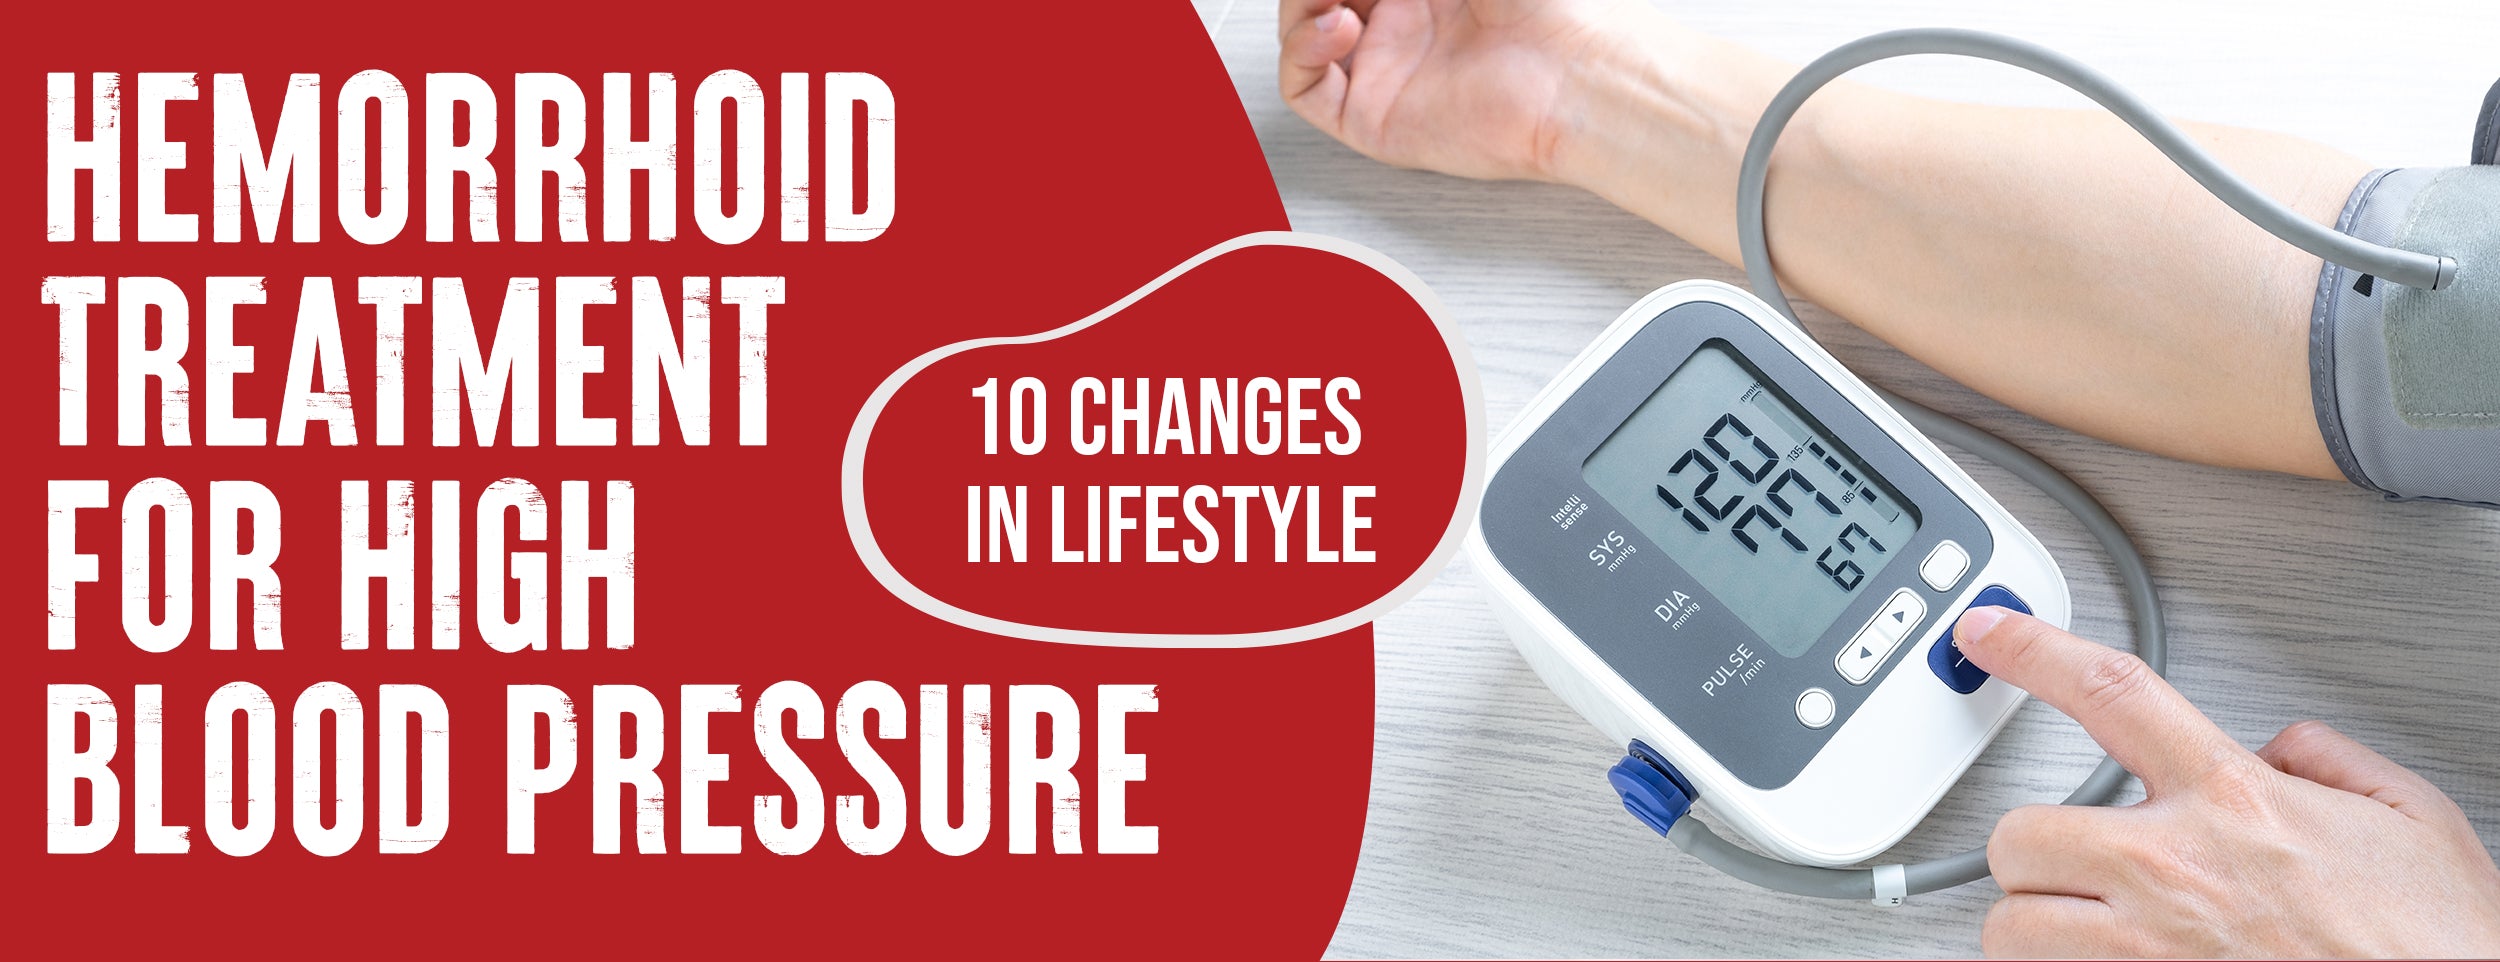 10 Lifestyle Tips for Hemorrhoid Treatment for High Blood Pressure